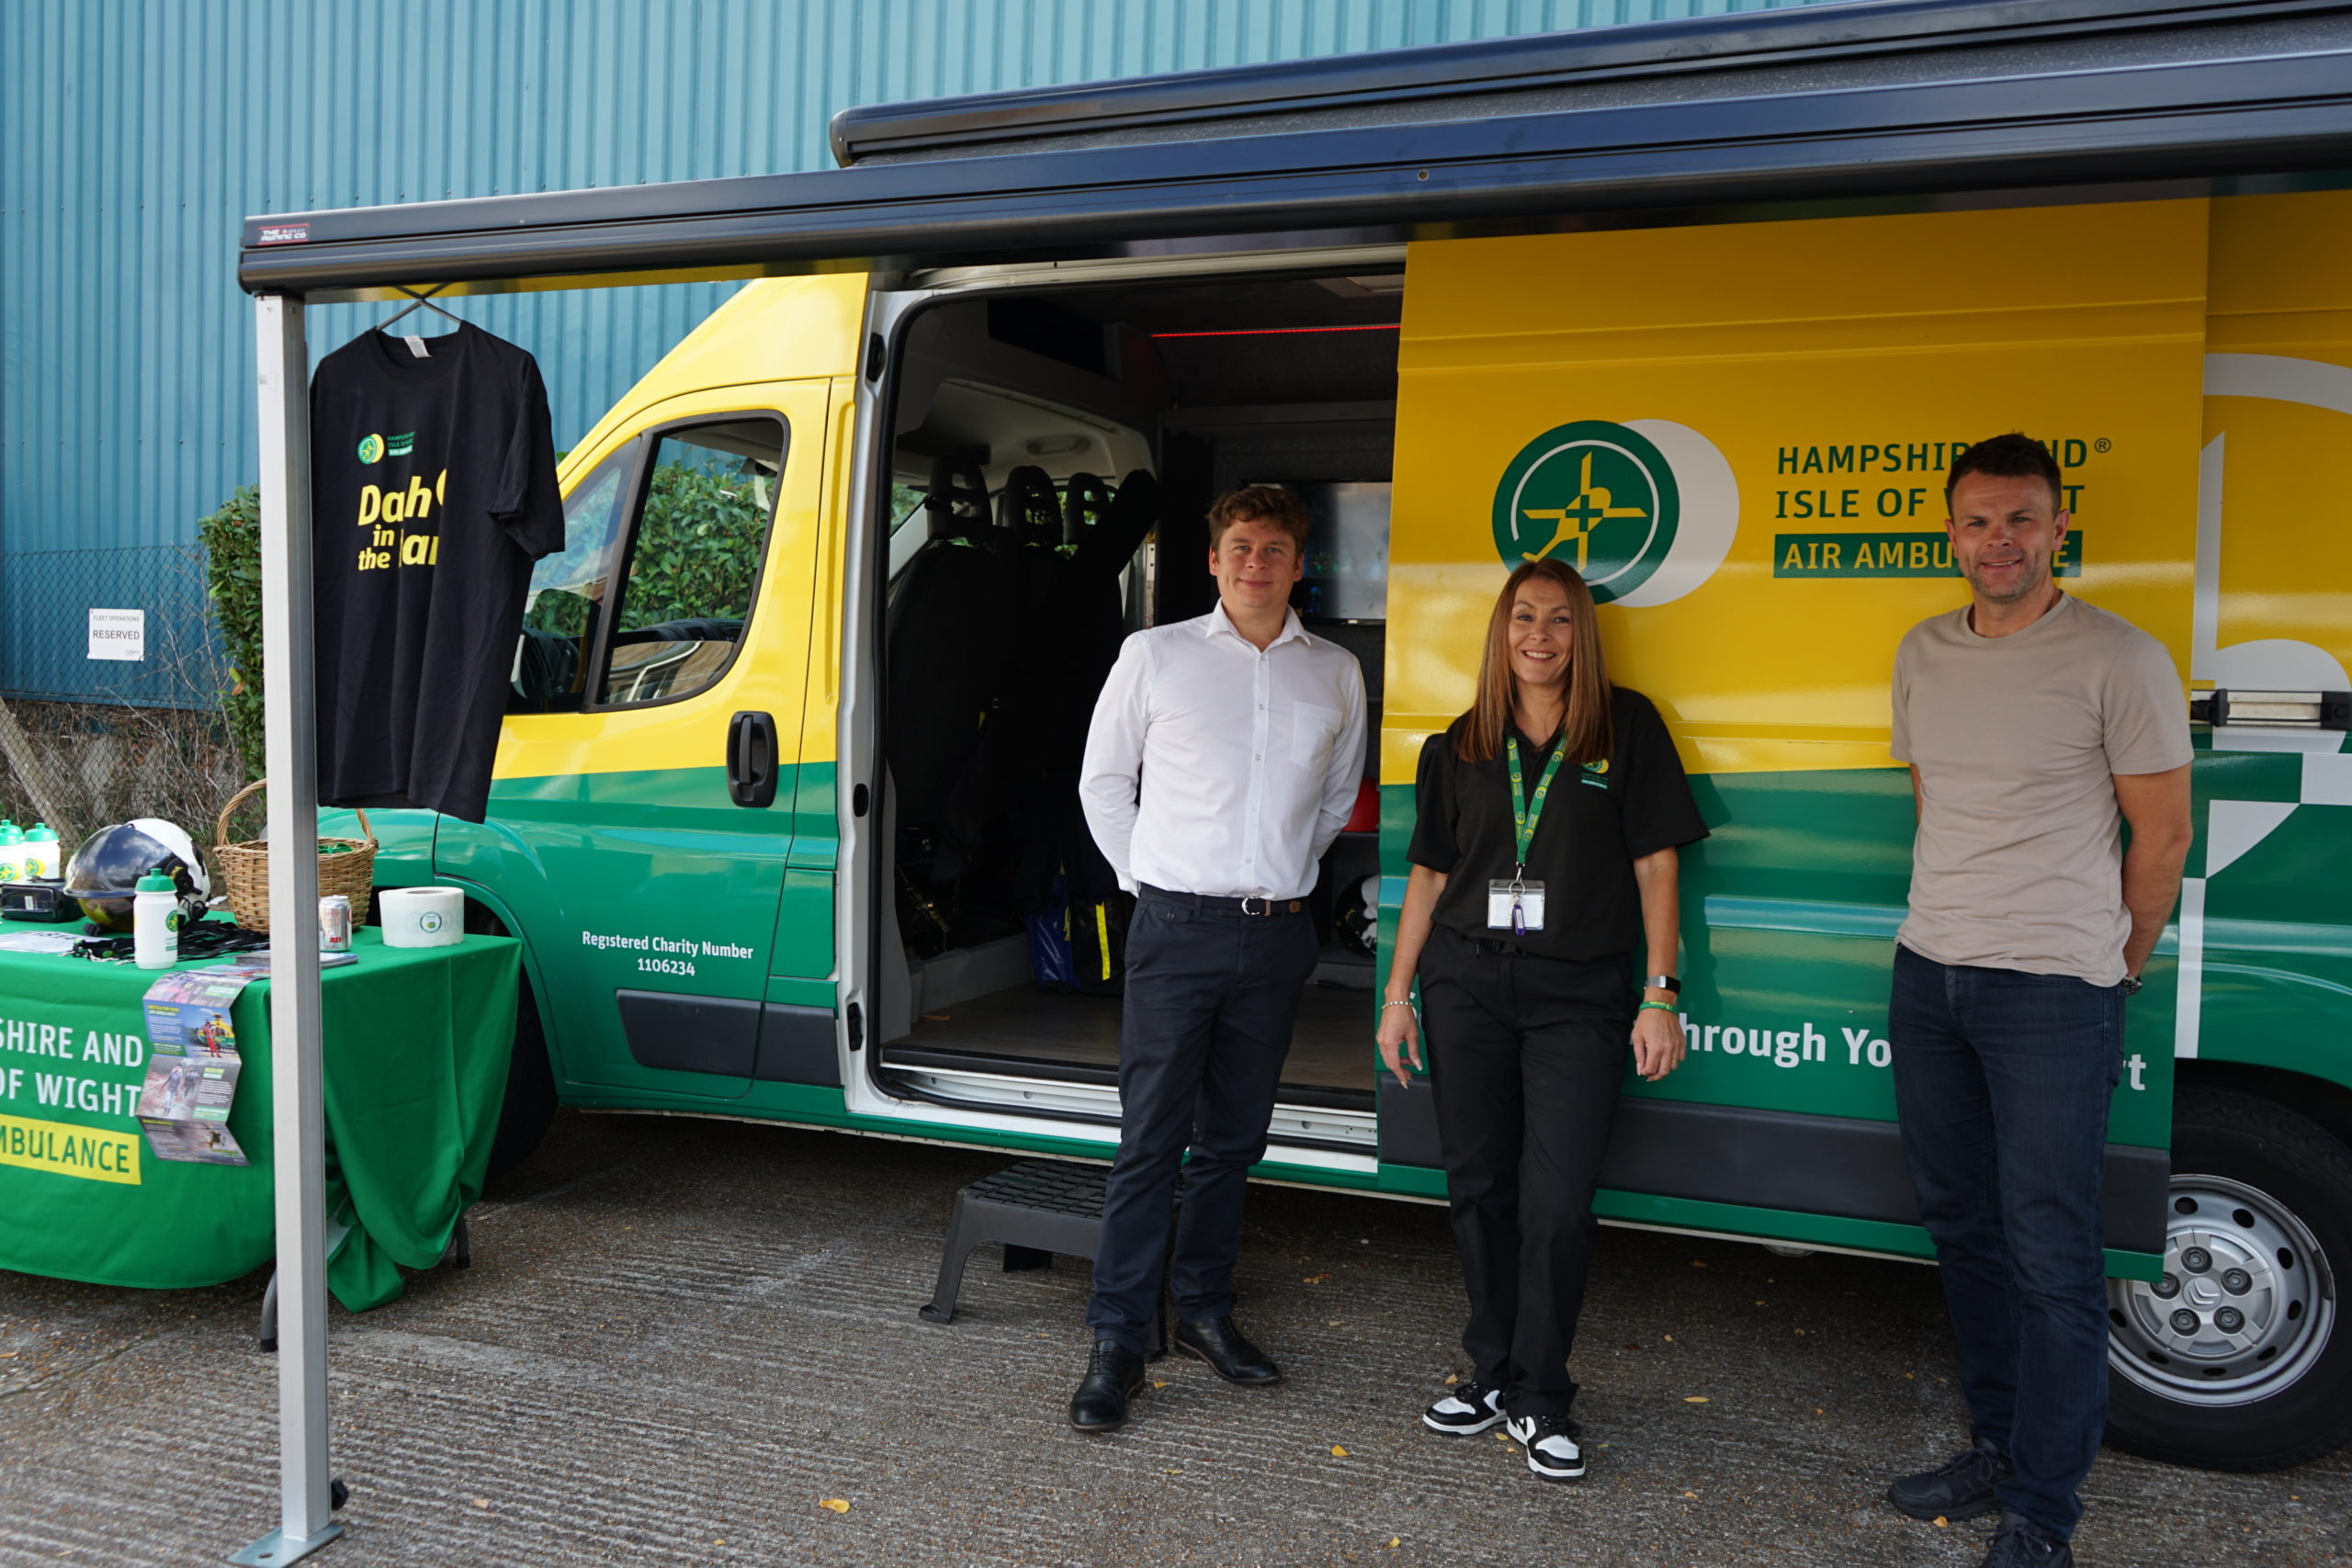 Three people stood in front of a yellow and green van